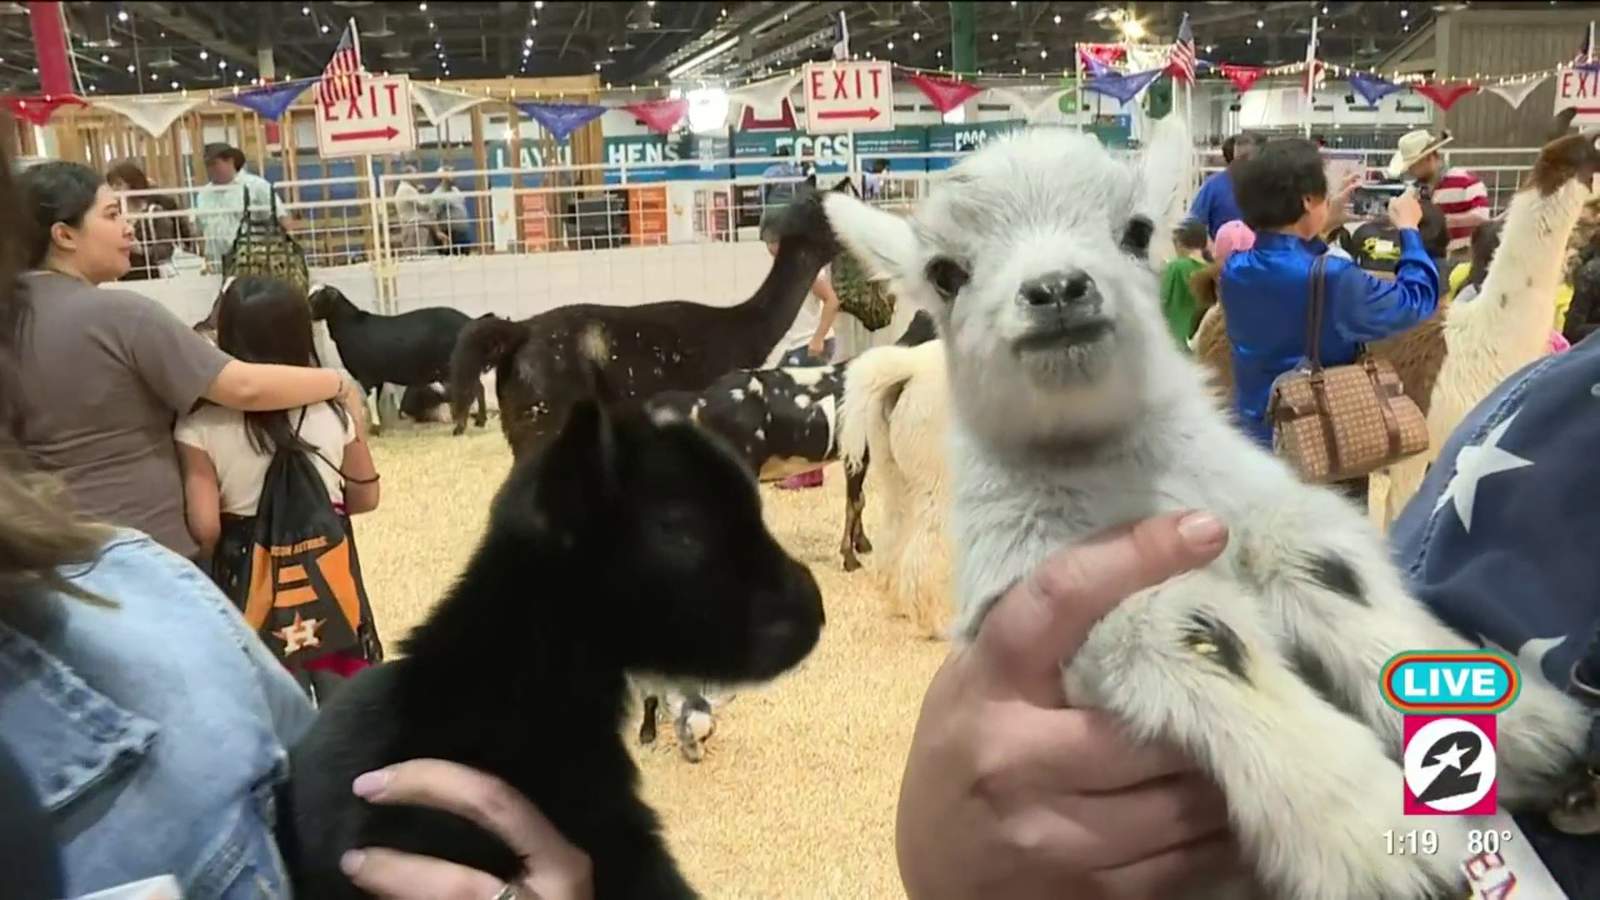 The Houston Livestock Show and Rodeo kicks off 2020 season with the cutest baby animals